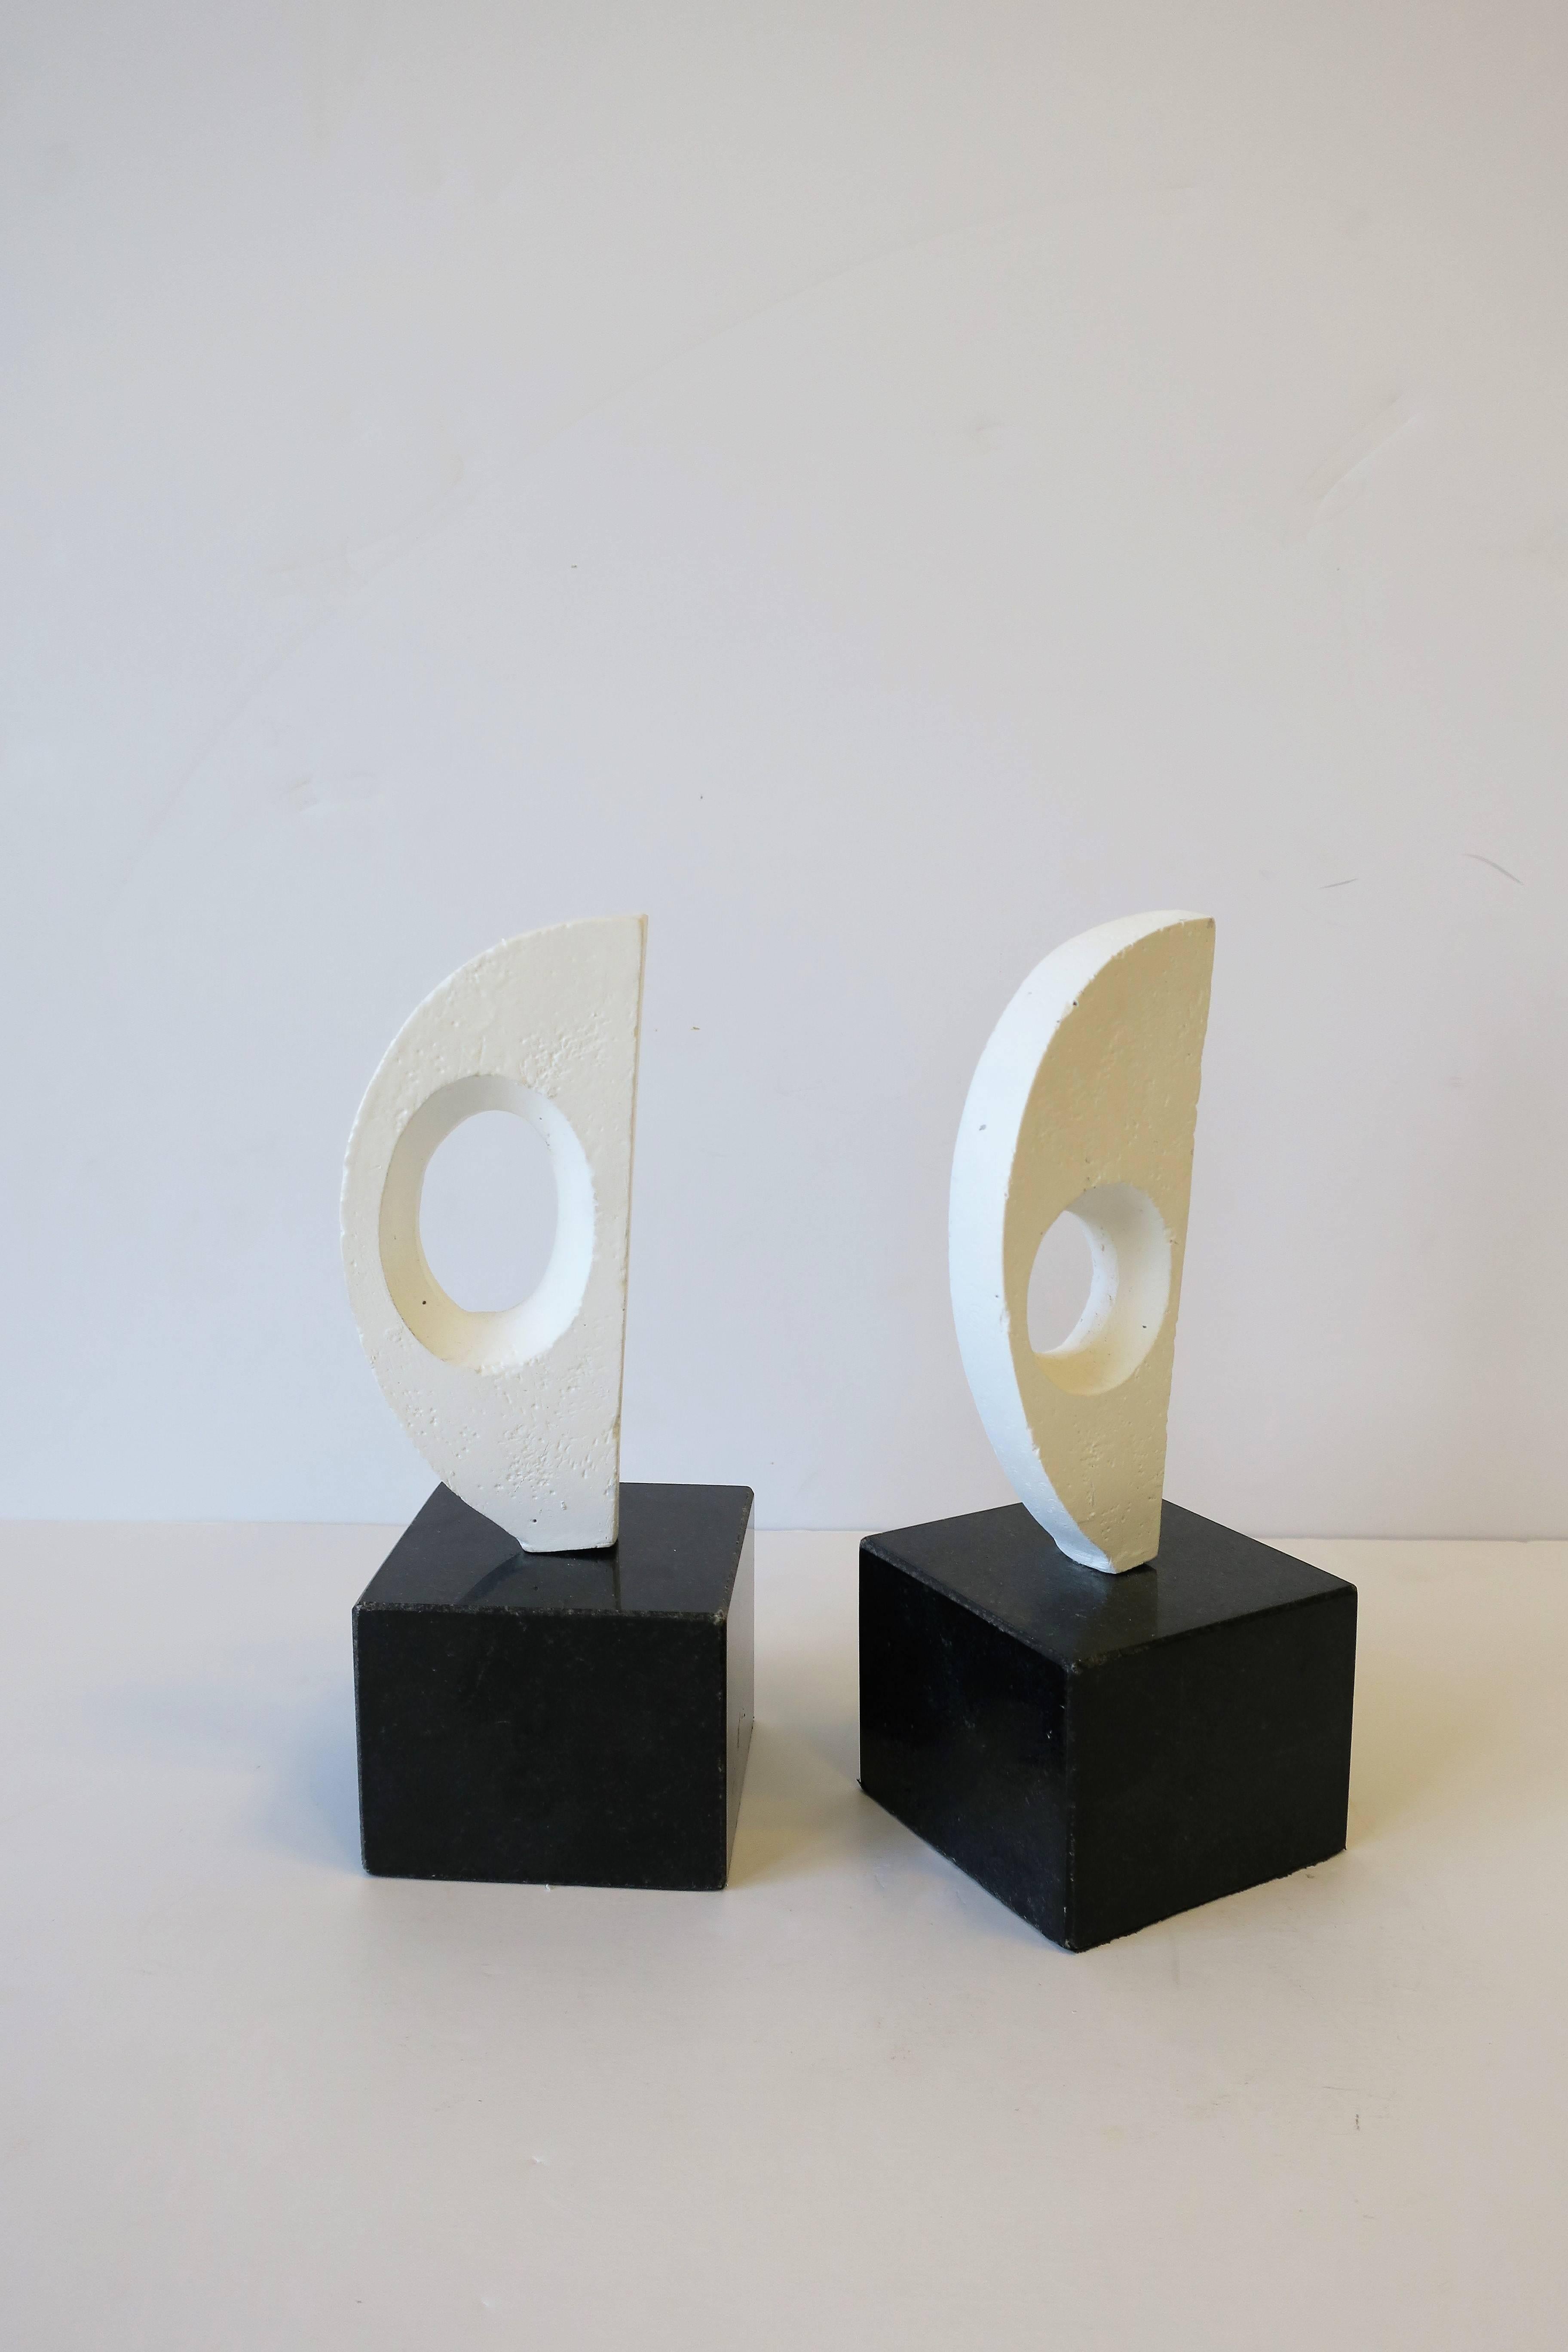 Pair of black and white abstract sculpture bookends. Bases are black marble or granite. Measurements include: 8.25 in. high x 3.25 in. square base.

Pair of available here online. By request, pair can be made available by appointment to the Trade in